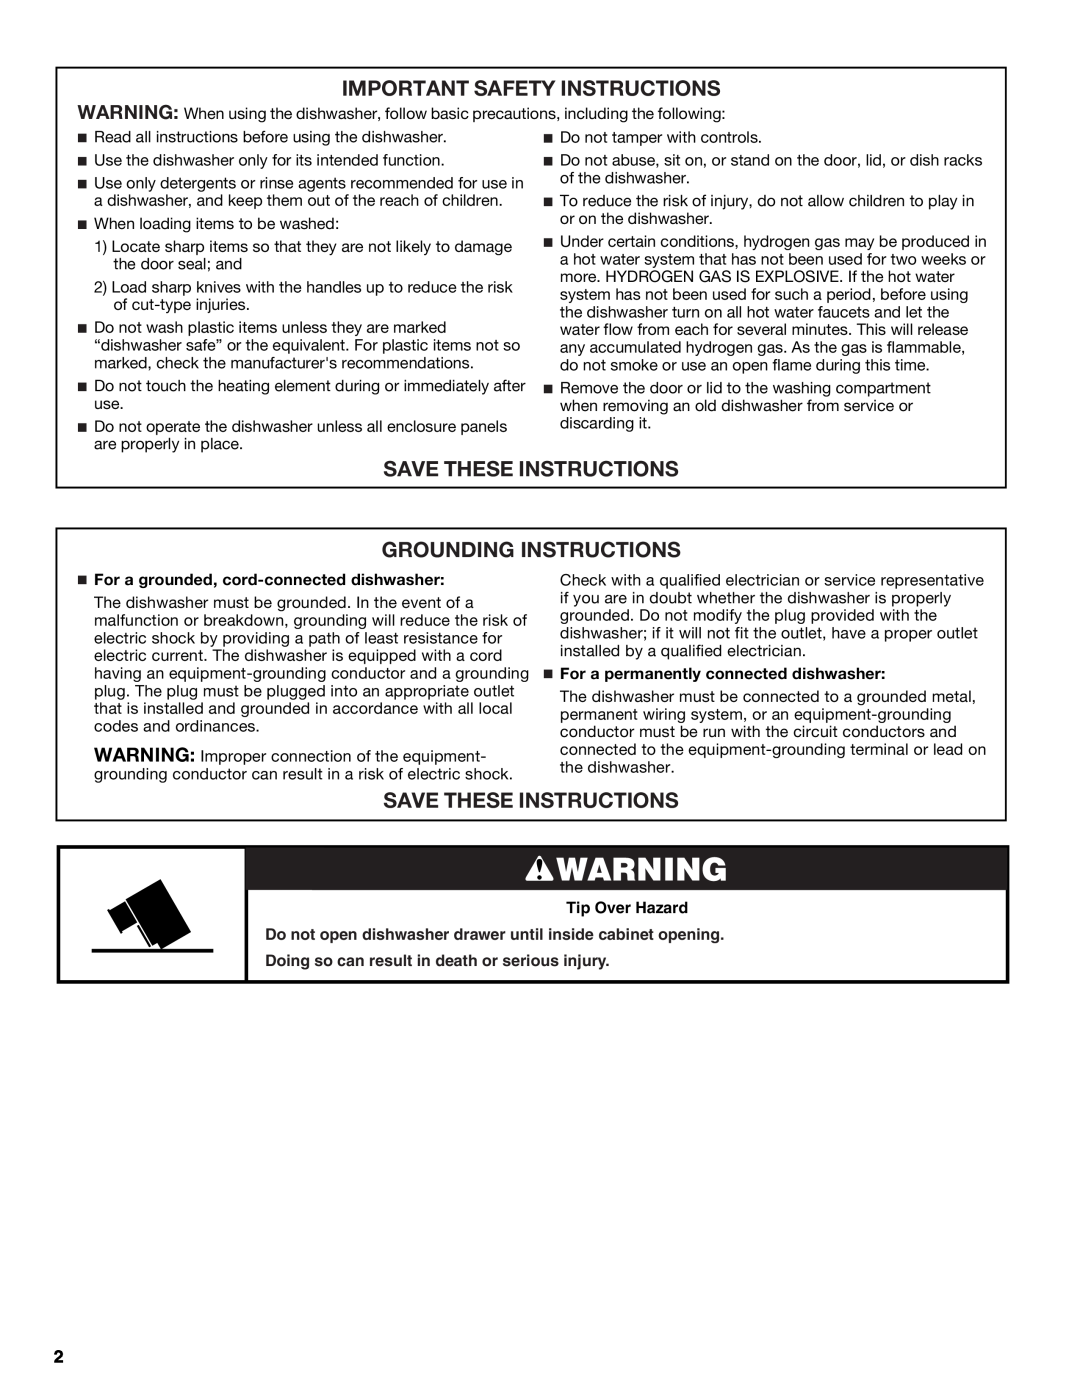 Maytag MDD8000AWS, W10185074A, W10185072A Important Safety Instructions, Save These Instructions Grounding Instructions 